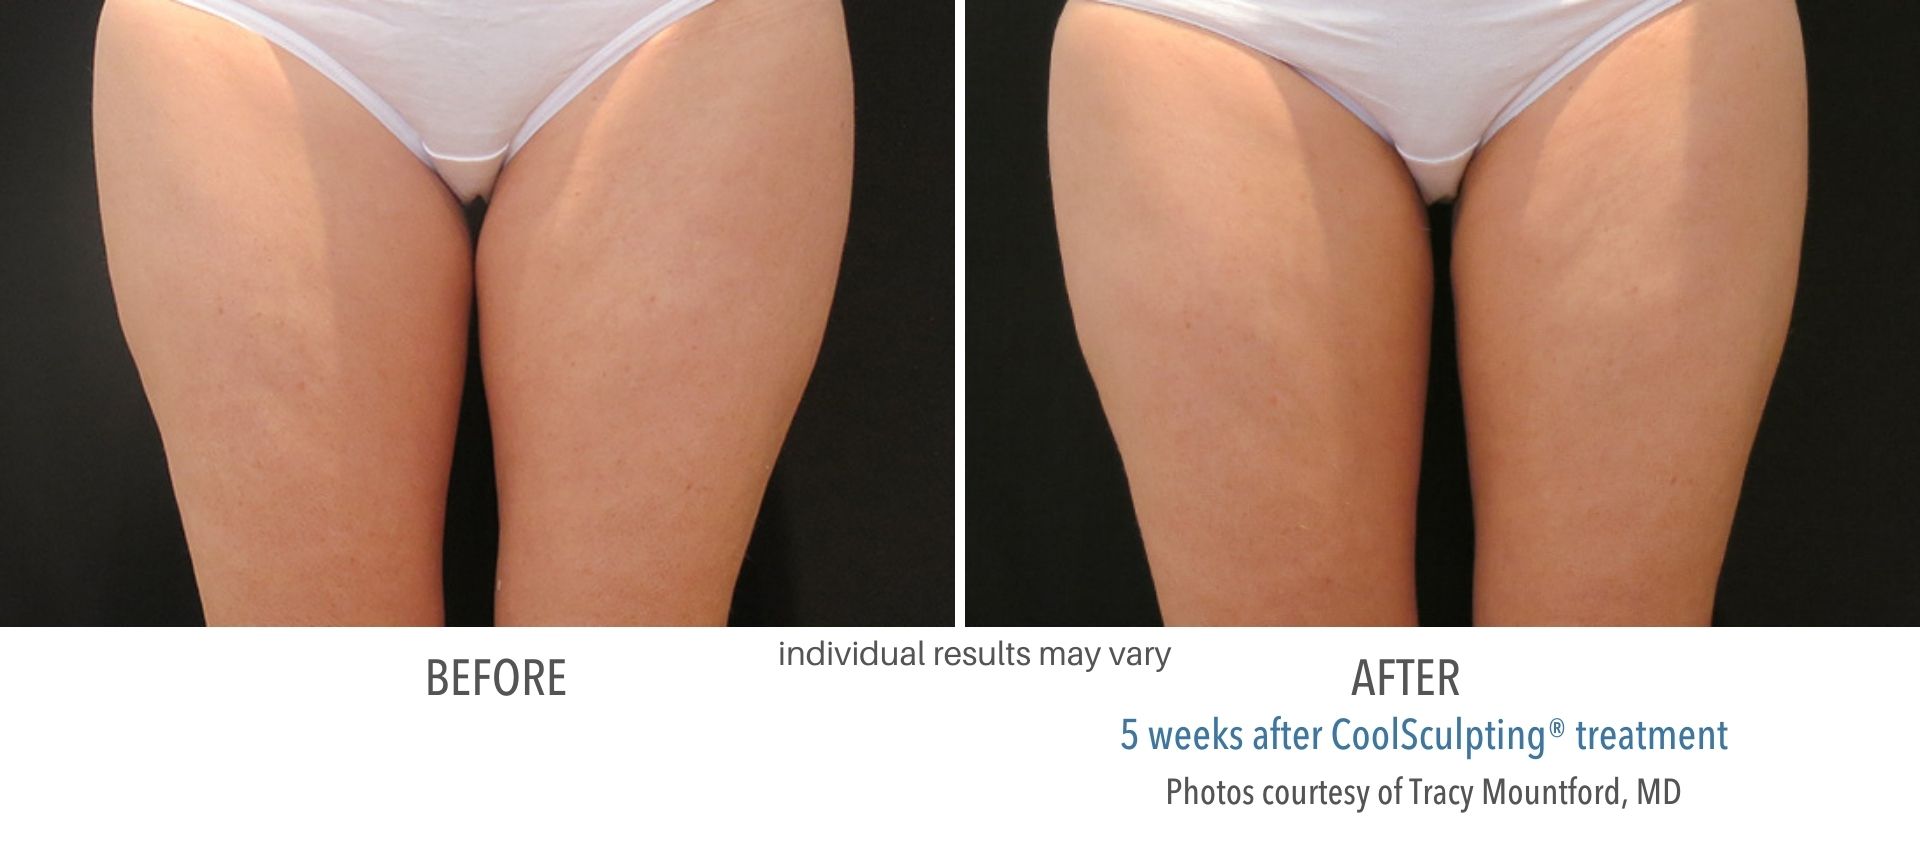 coolsculpting treatment for thigh